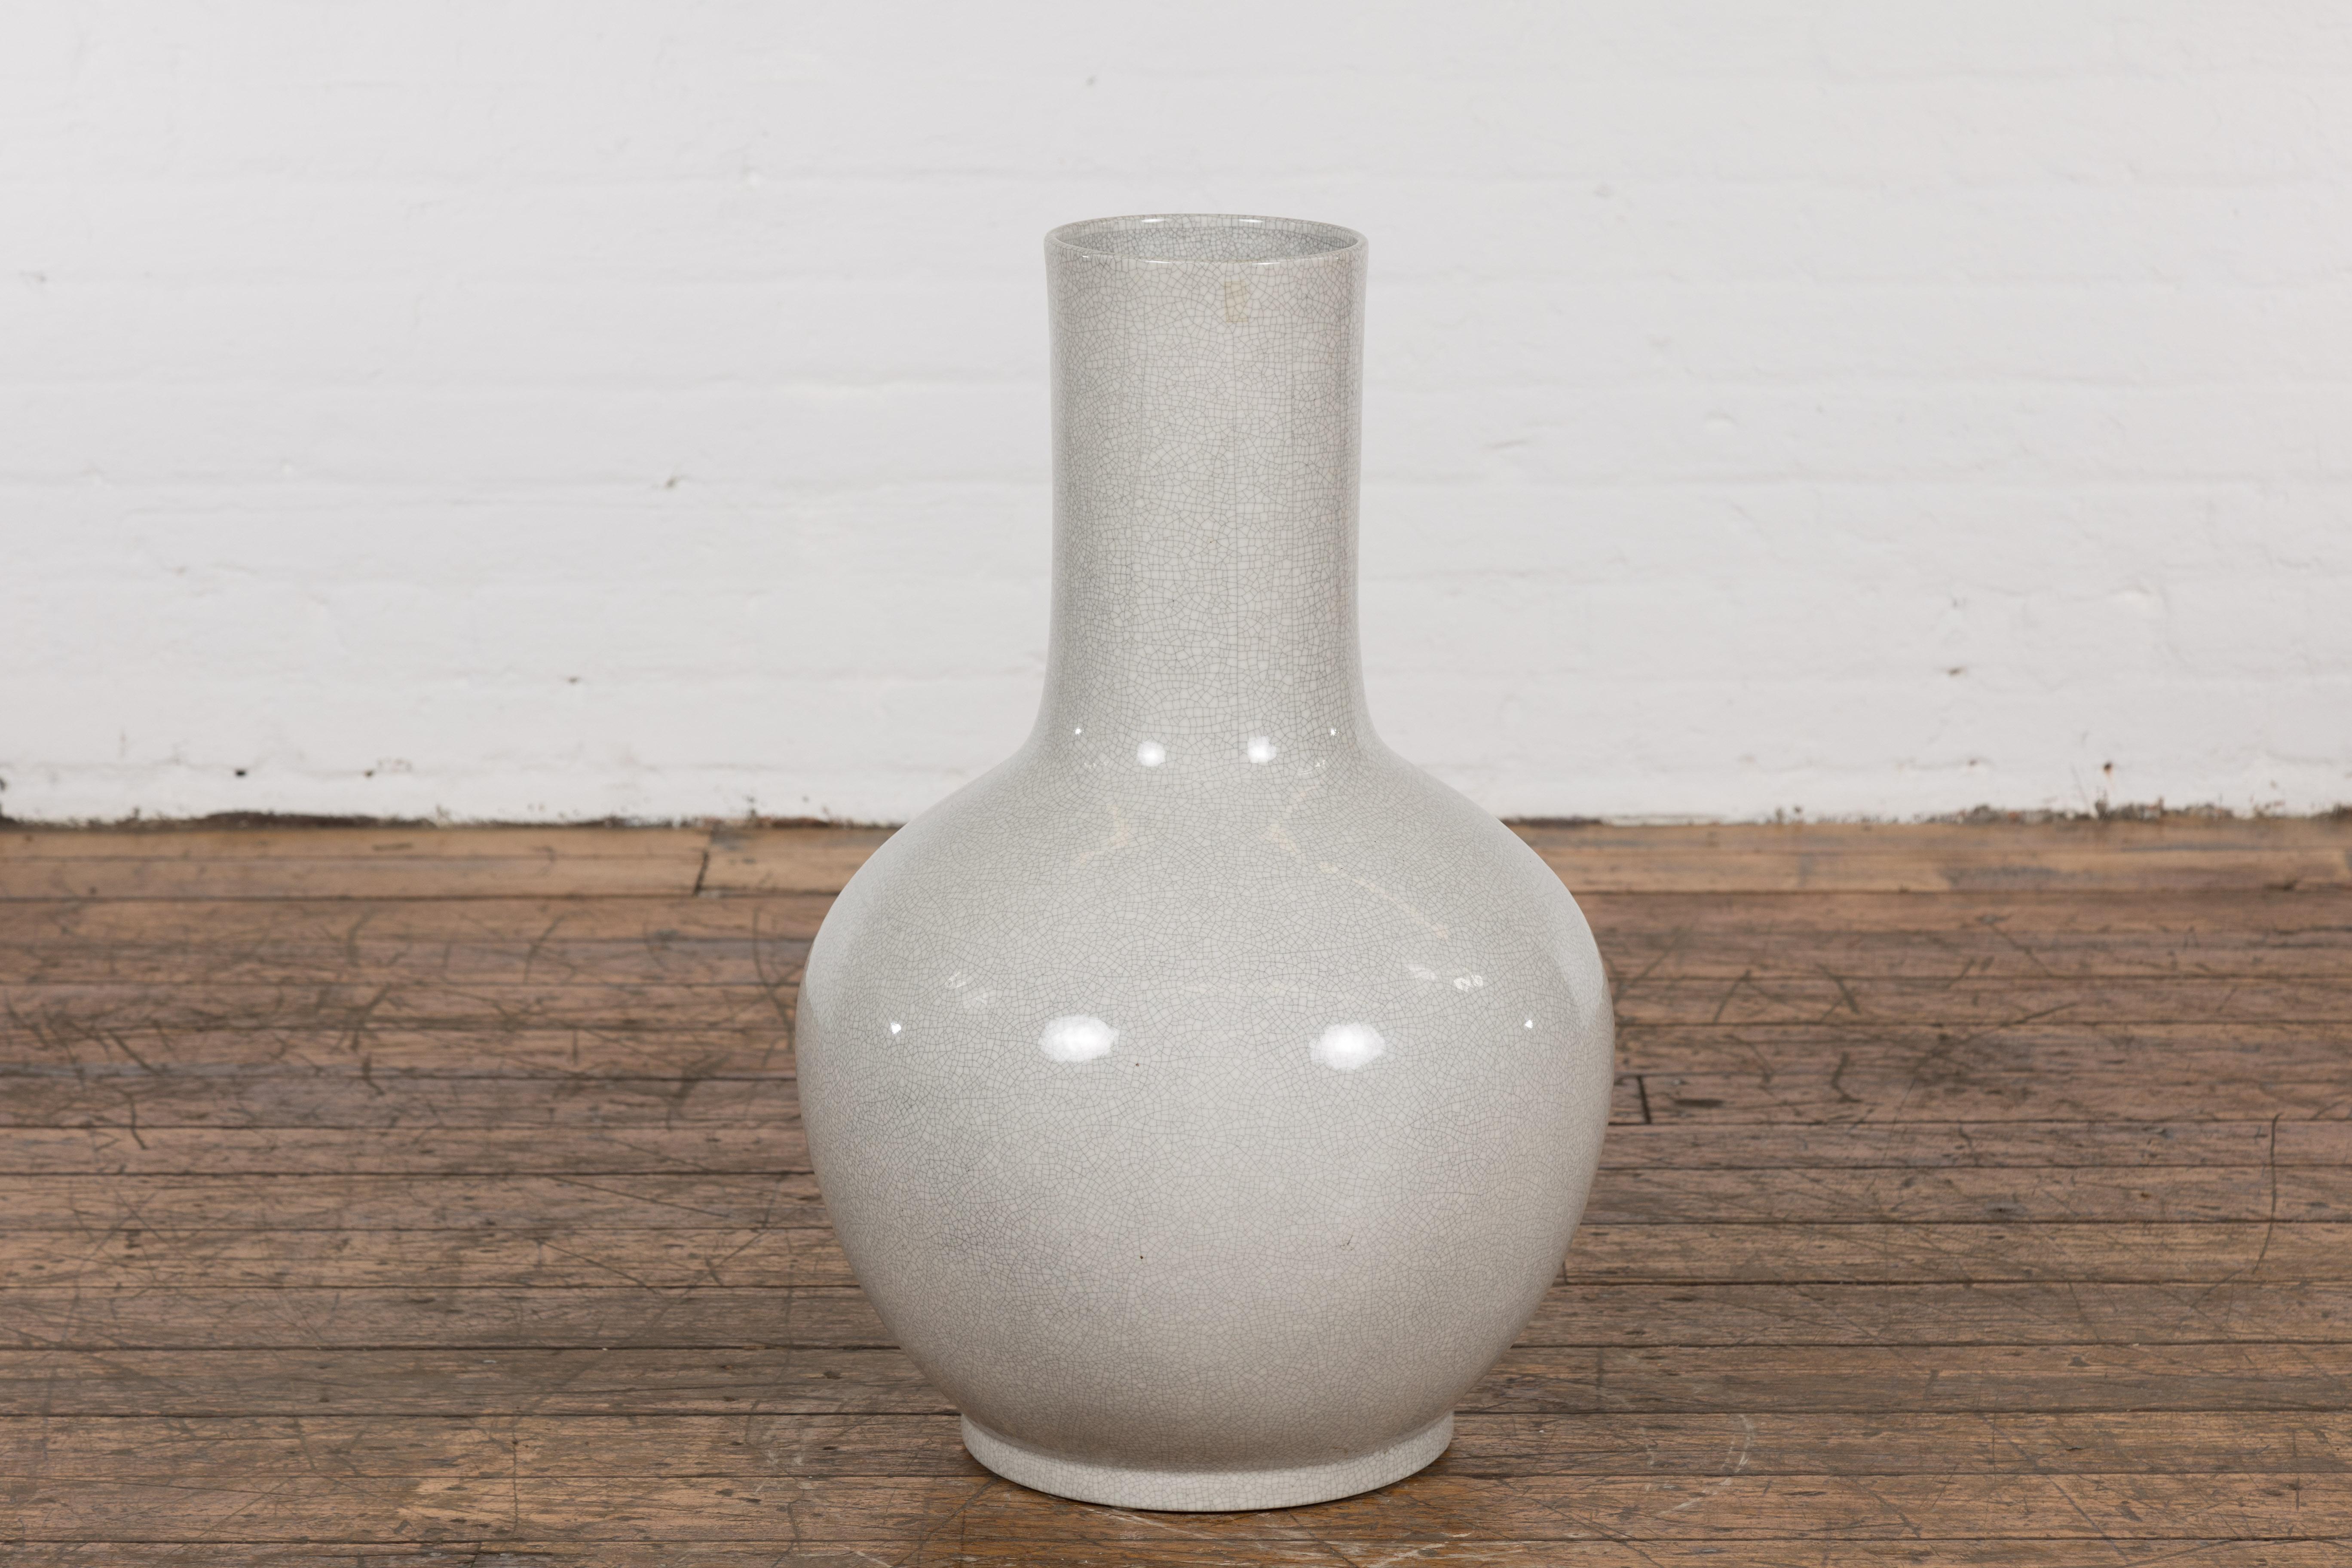 A Chinese vintage Kendi shape vase from the late 20th century, with crackle grey and white finish. This Chinese vintage Kendi shape vase from the late 20th century is a splendid fusion of artisanship, and refined design. The vase showcases an